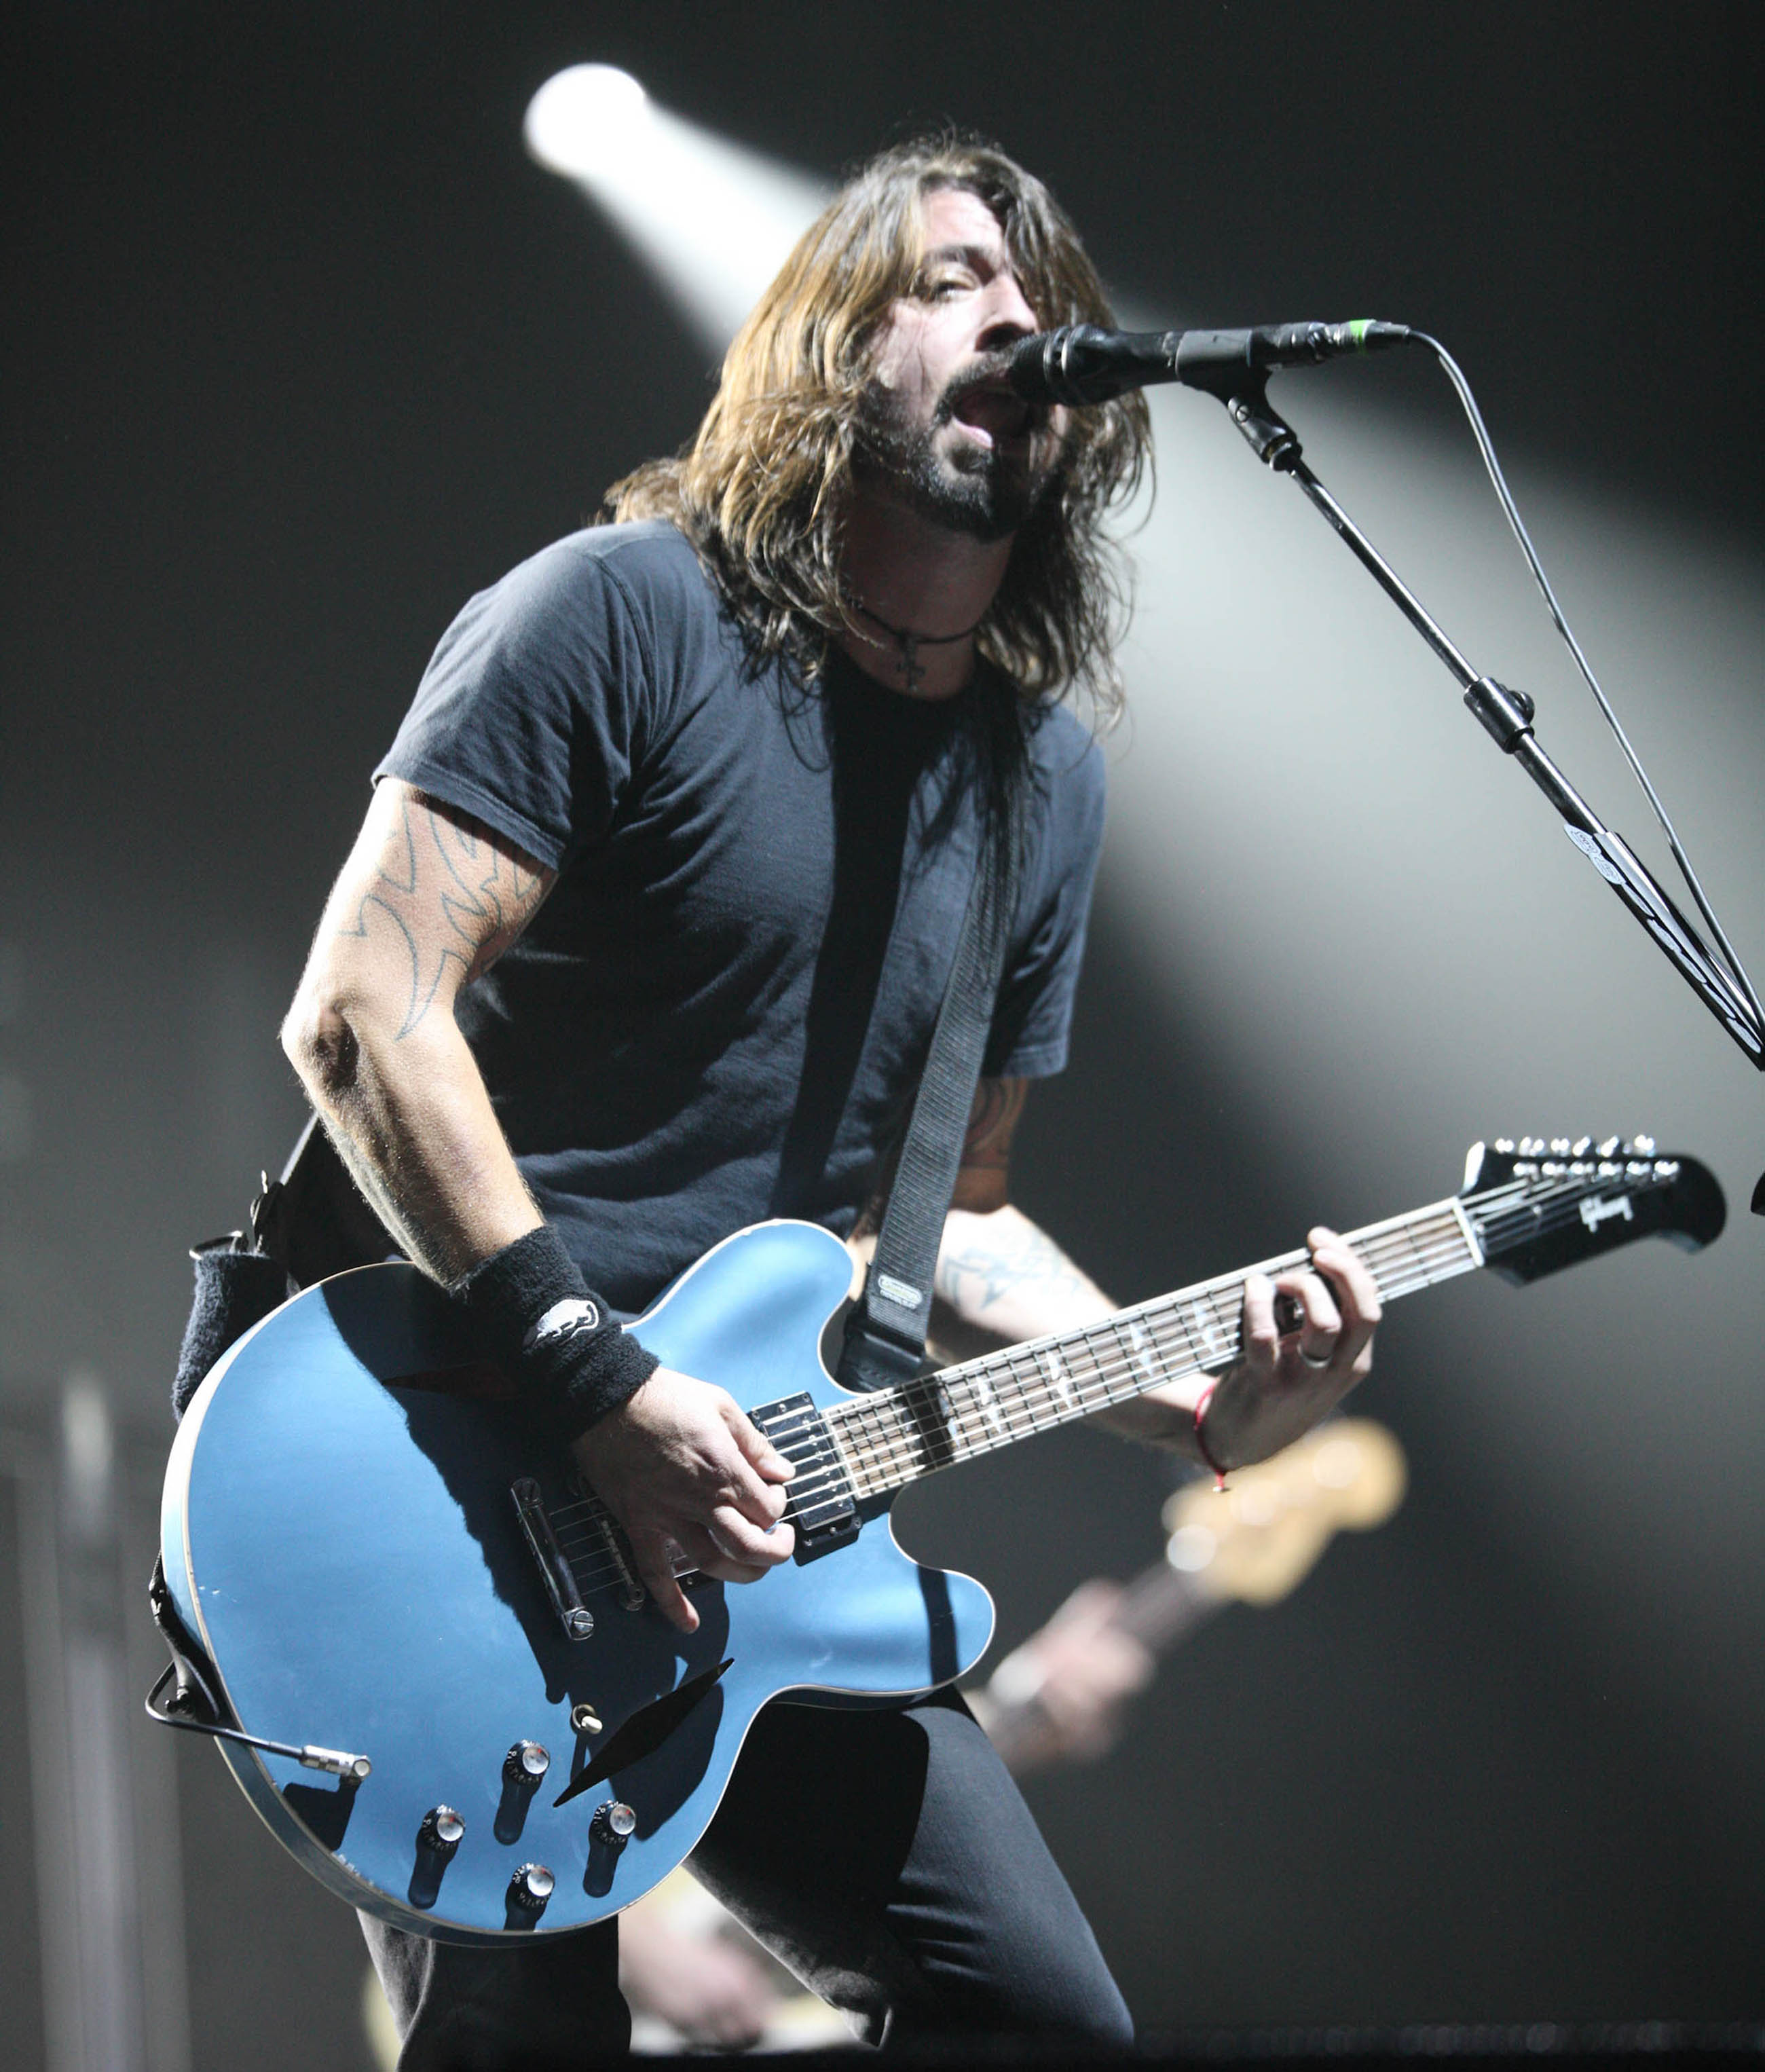 Foo Fighters, Spelning, Dave Grohl, Rockband, Musik, Band, Rock